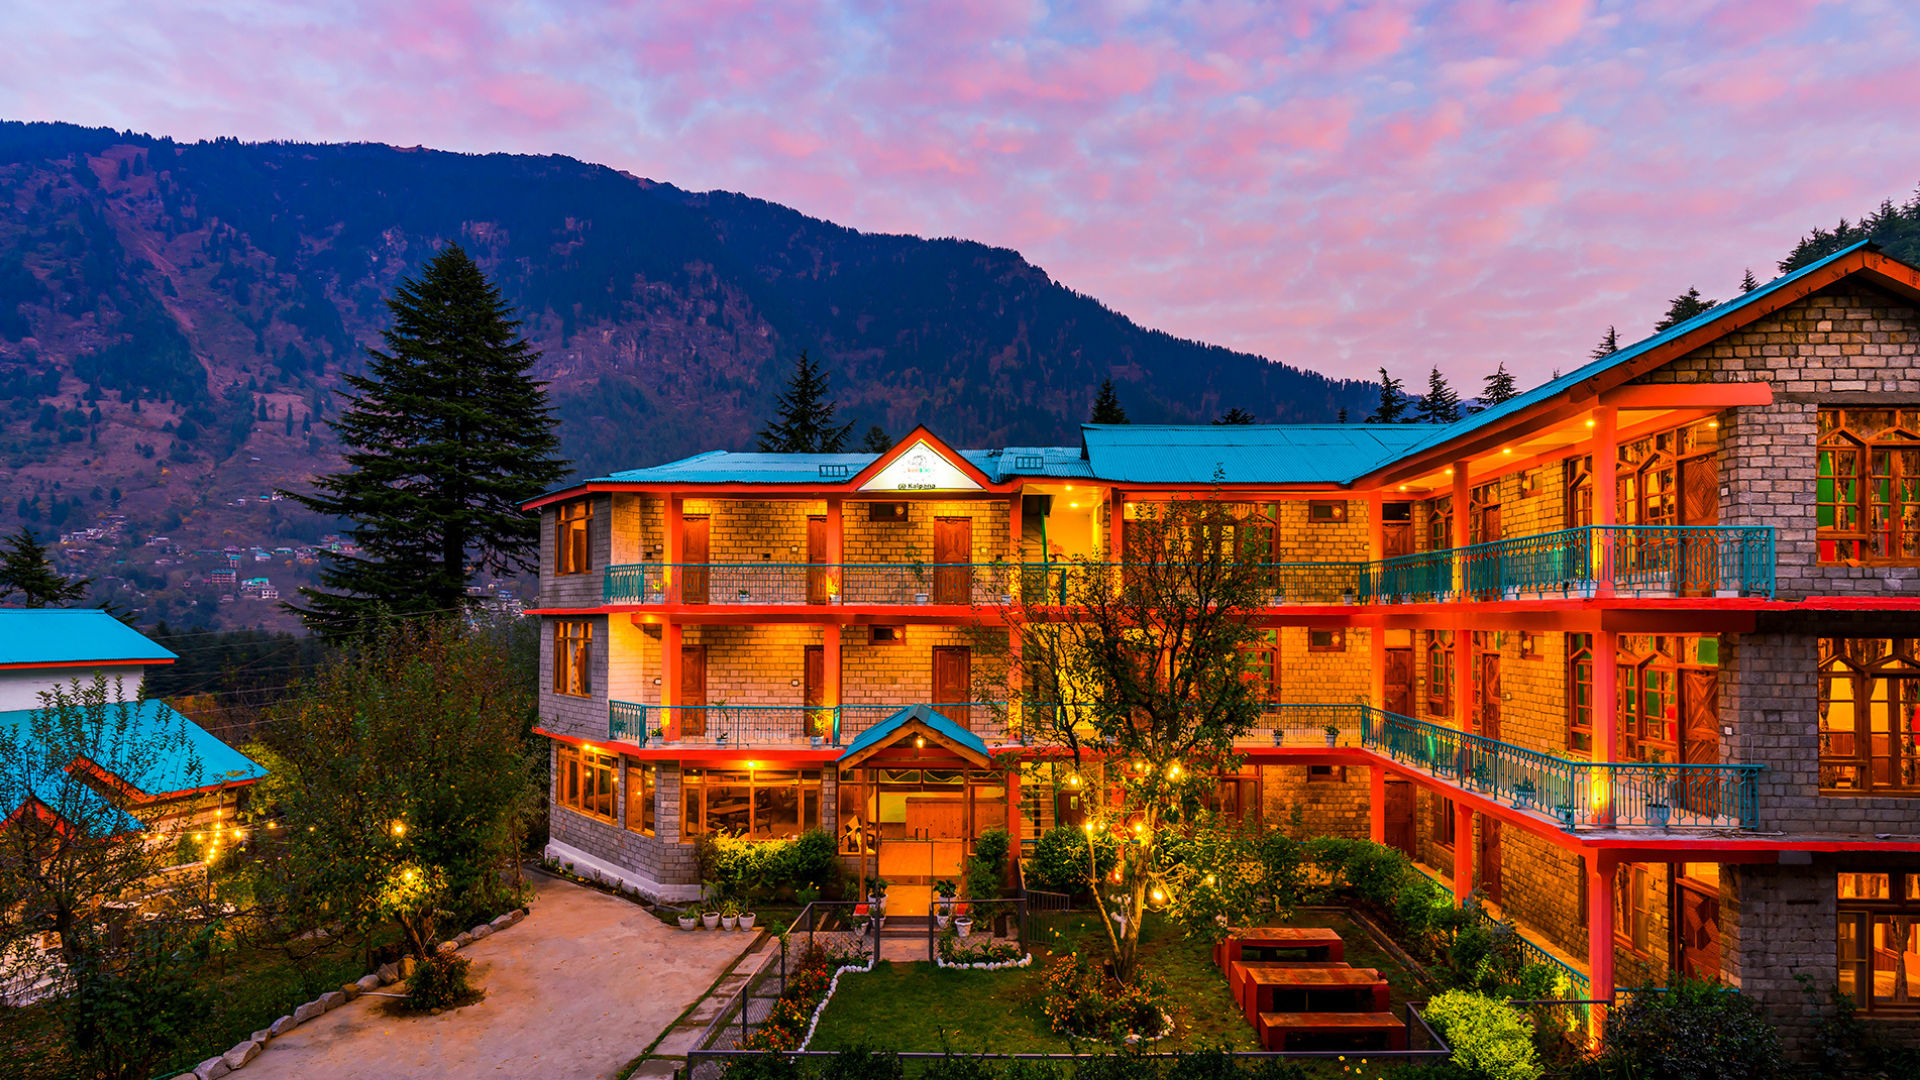 Keekoo Manali in Manali, India - Find Cheap Hostels and Rooms at ...